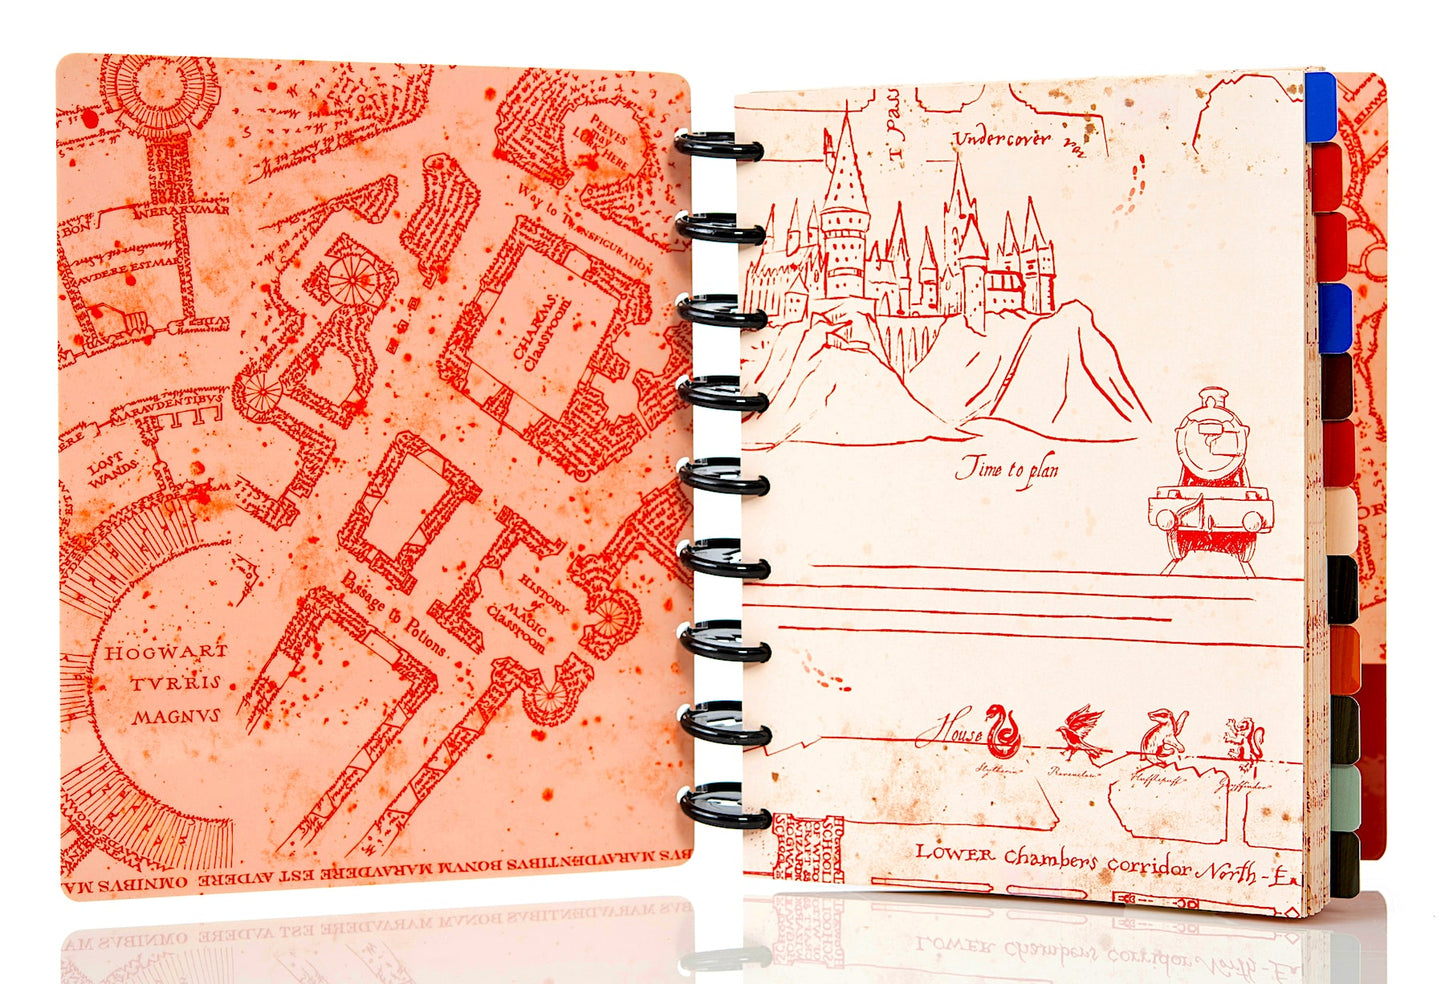 Harry Potter Marauder's Map Undated Weekly Disc Planner